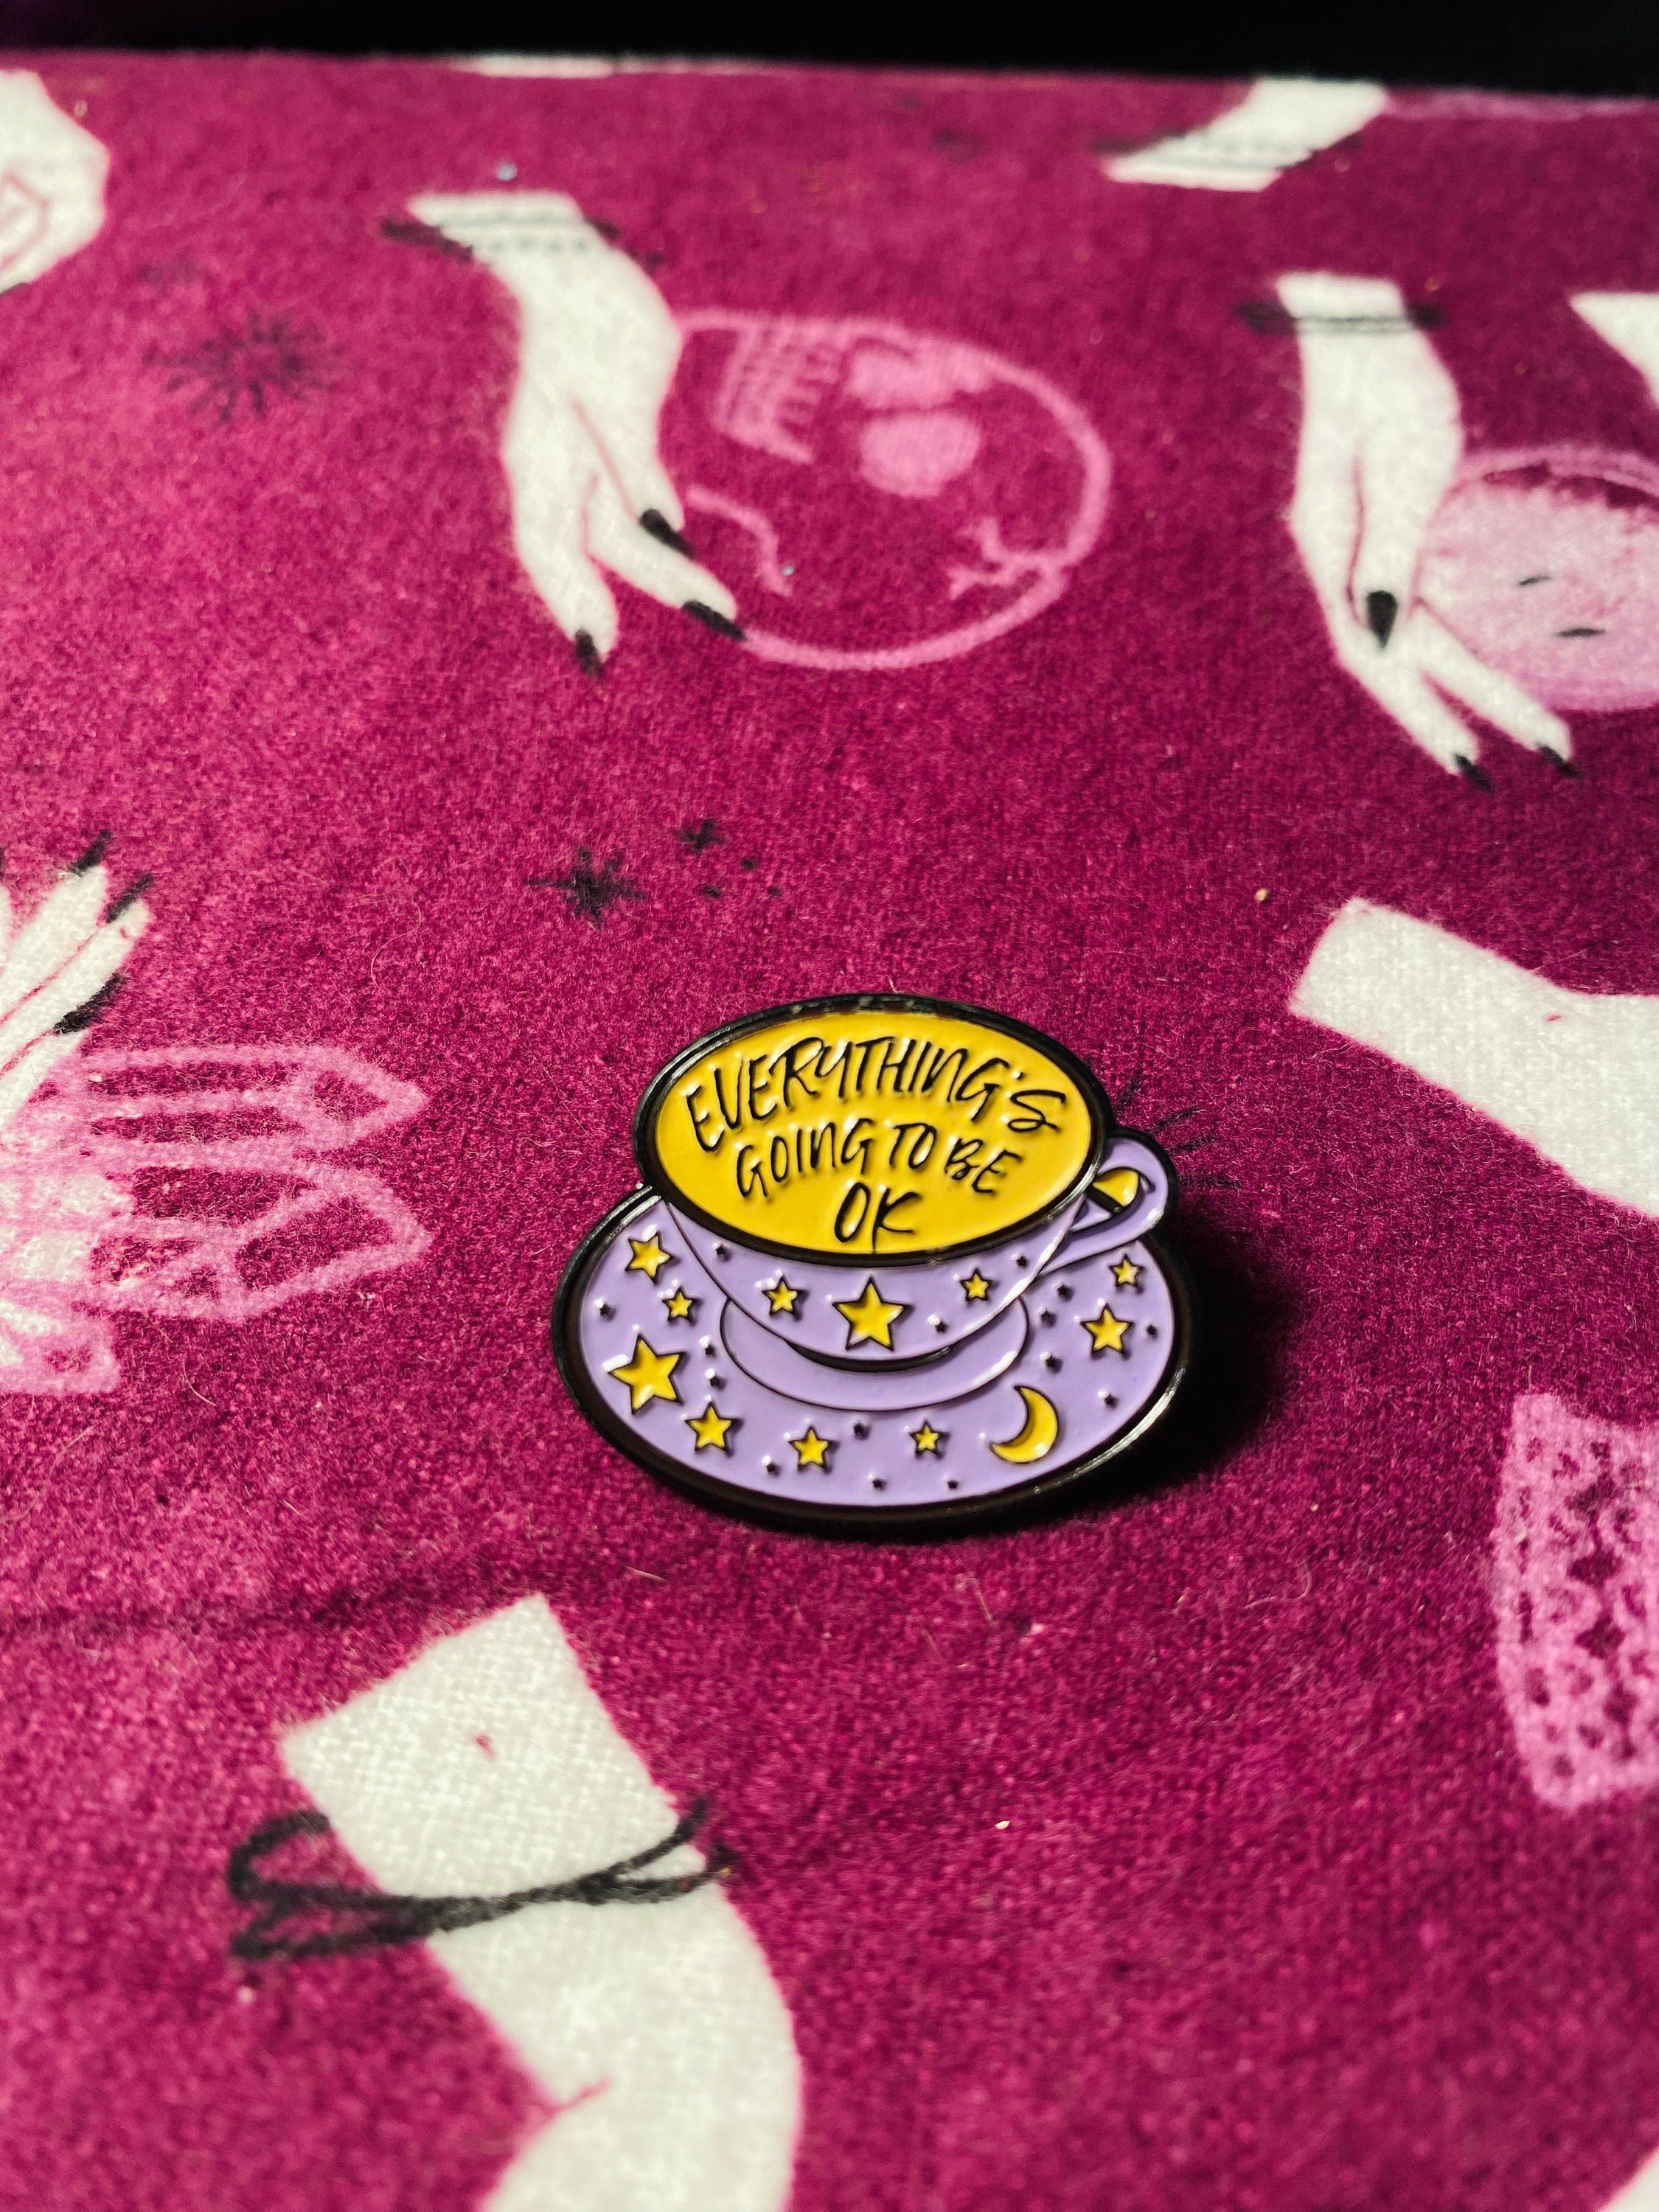 Mental Health Pins | It's Okay Not To Feel Okay | Everything Will be Okay | Suicide Prevention | - Sunlitsage